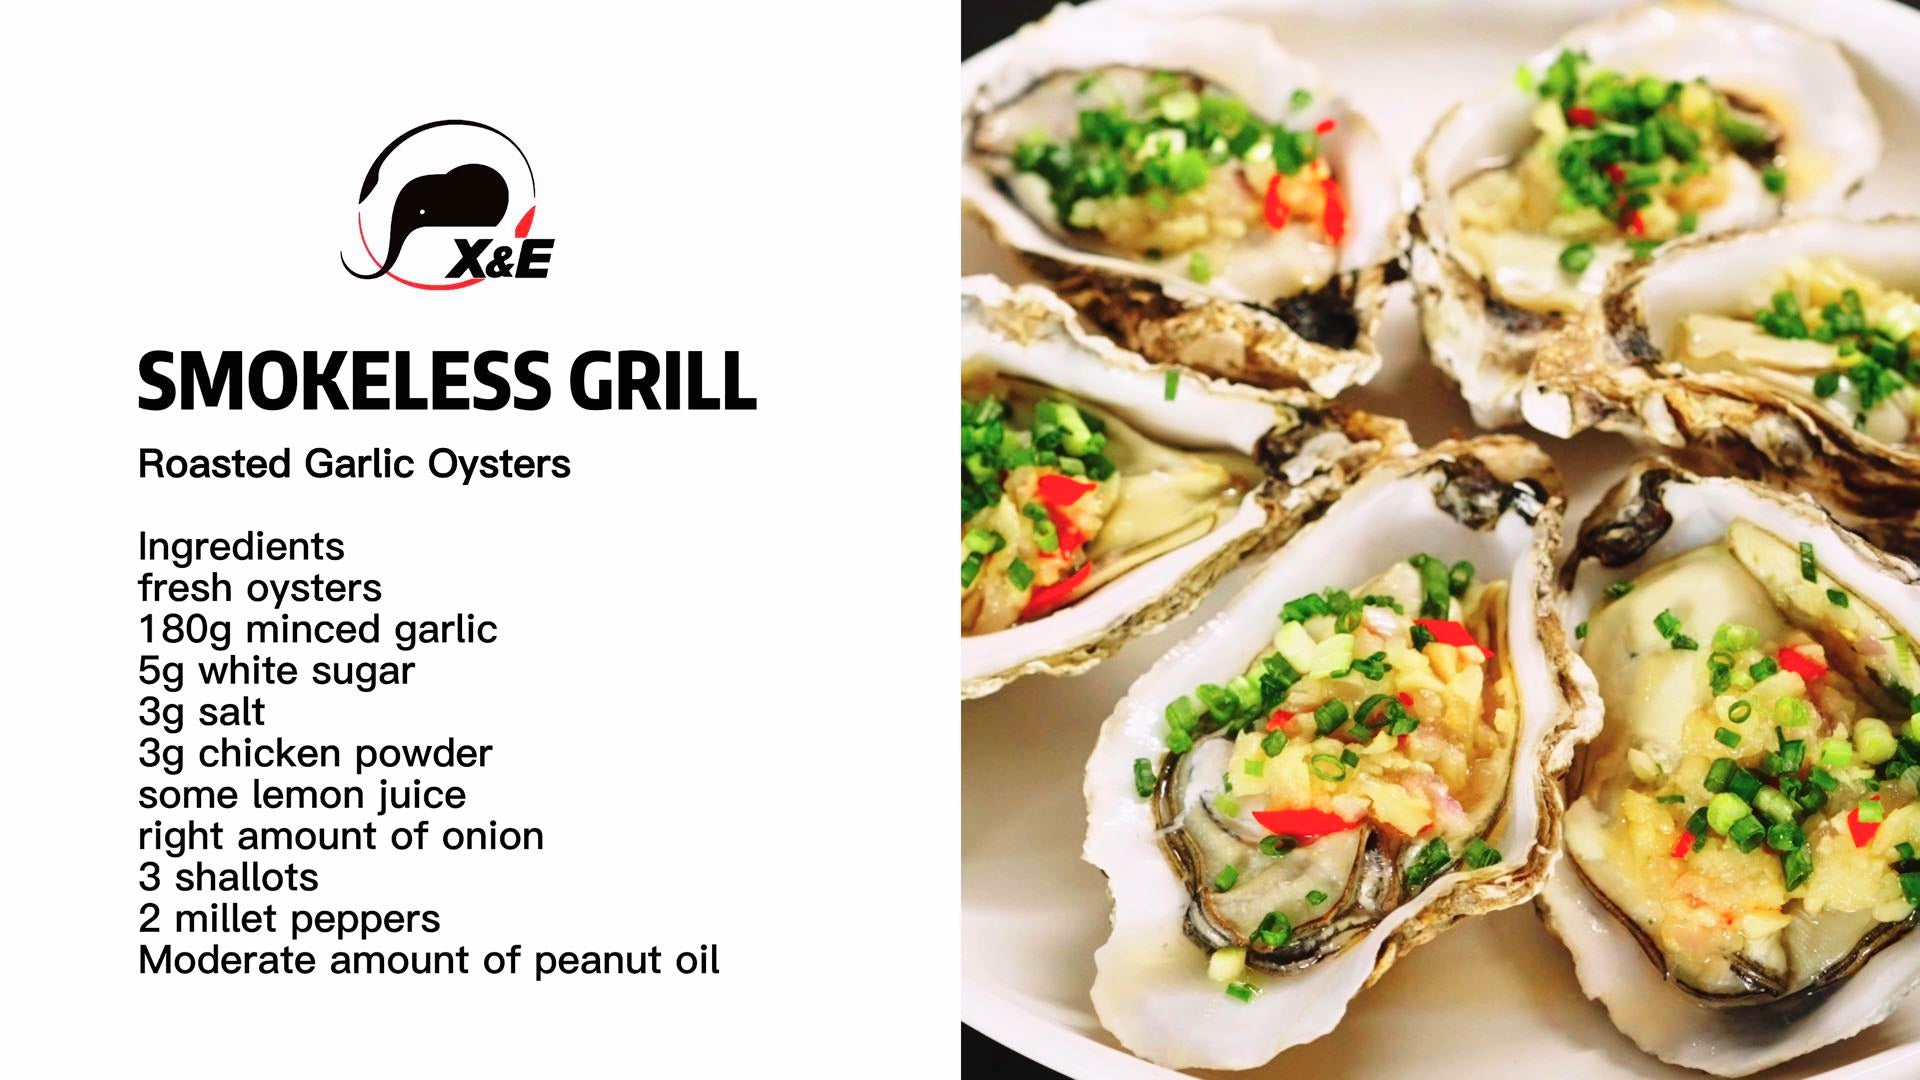 Enjoy the juiciness and flavor of grilled oysters with ease with the X&E Smokeless Grill Garlic Oyster Grill